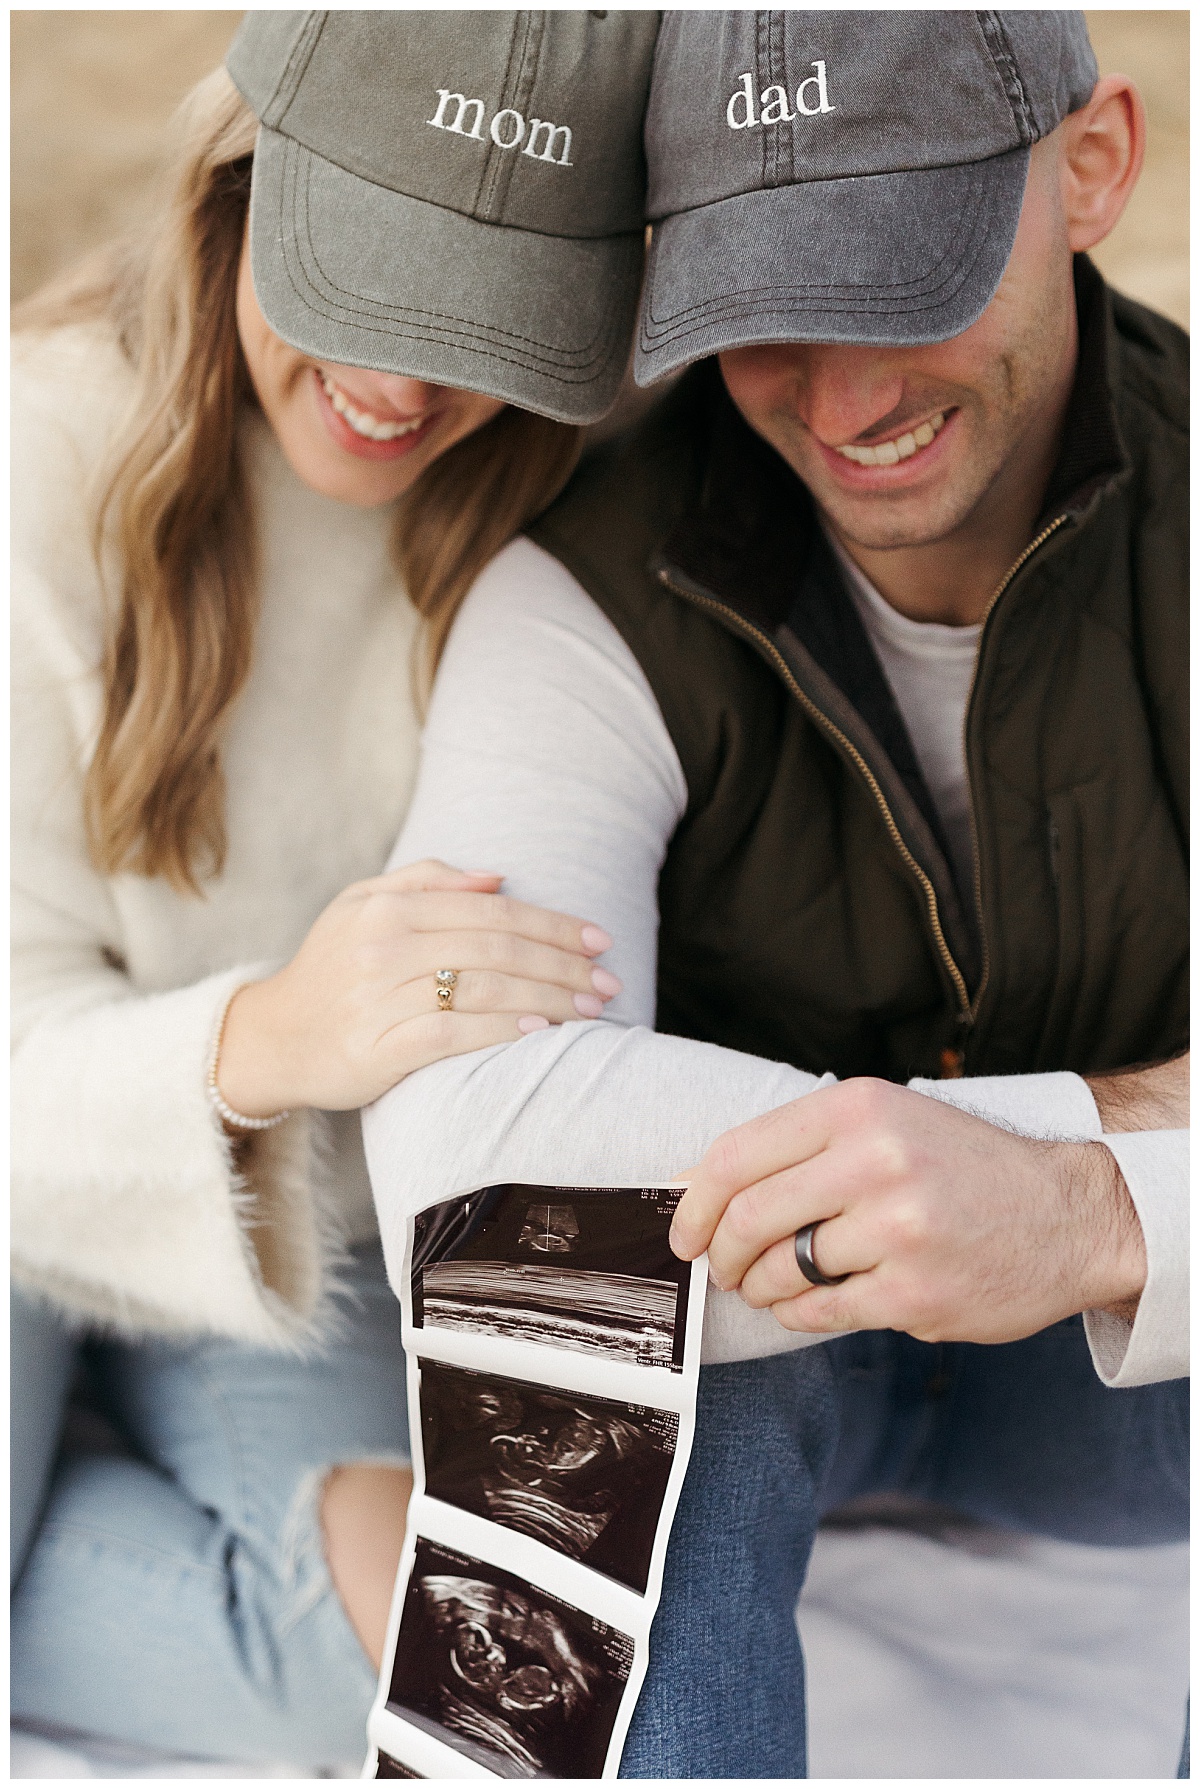 mom and dad to be lean heads together as they look at ultrasound by Virginia Beach photographer